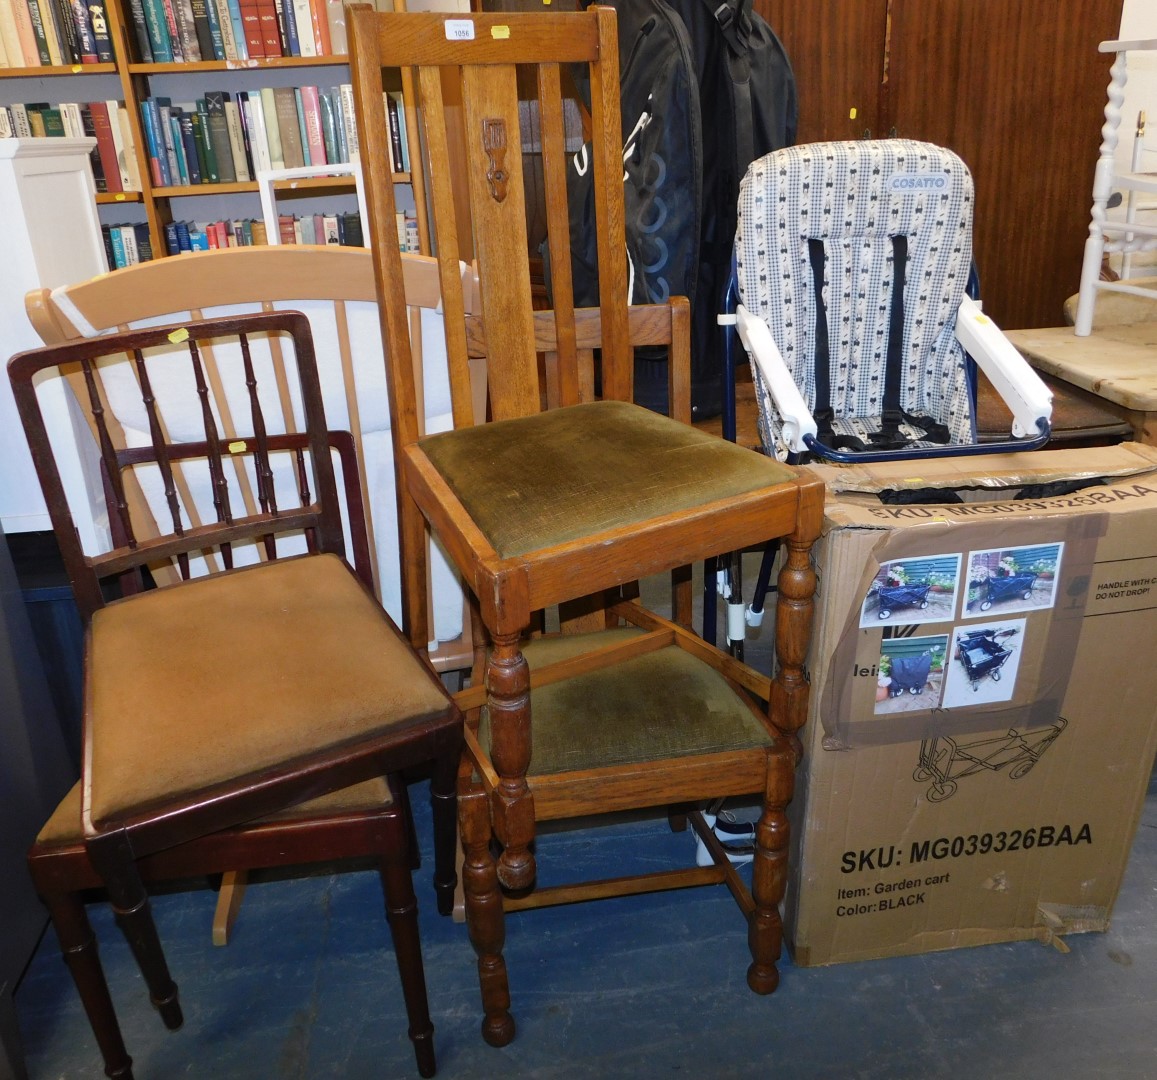 A child's chair, a garden trolley, and four dining chairs.